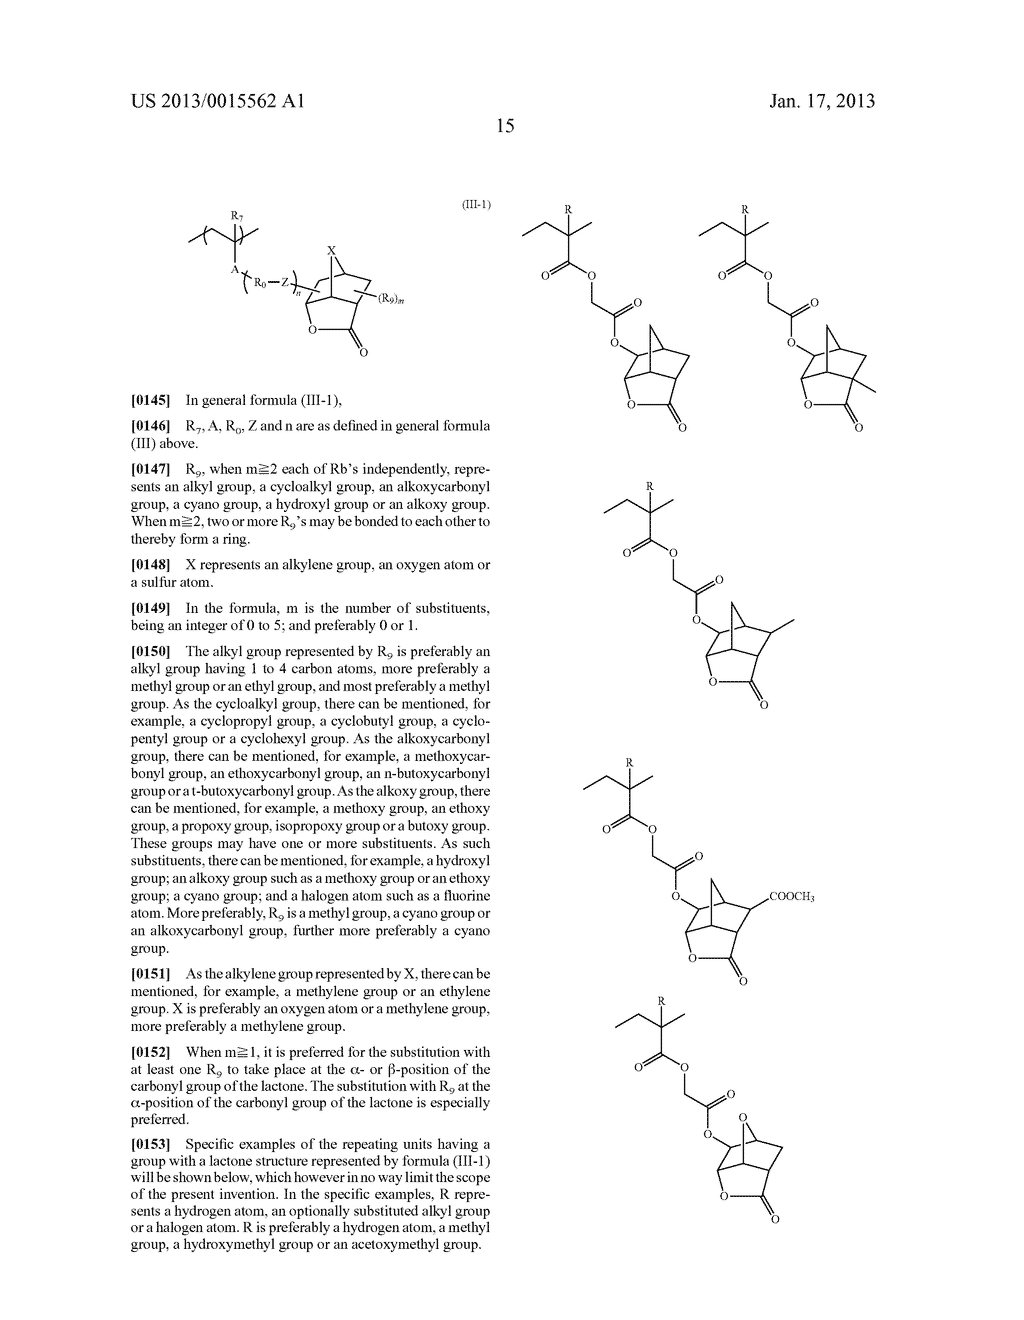 ACTINIC-RAY- OR RADIATION-SENSITIVE RESIN COMPOSITION, ACTINIC-RAY- OR     RADIATION-SENSITIVE FILM THEREFROM AND METHOD OF FORMING PATTERN USING     THE COMPOSITIONAANM Yamamoto; KeiAACI Haibara-gunAACO JPAAGP Yamamoto; Kei Haibara-gun JPAANM Fujita; MitsuhiroAACI Haibara-gunAACO JPAAGP Fujita; Mitsuhiro Haibara-gun JPAANM Matsuda; TomokiAACI Haibara-gunAACO JPAAGP Matsuda; Tomoki Haibara-gun JP - diagram, schematic, and image 16